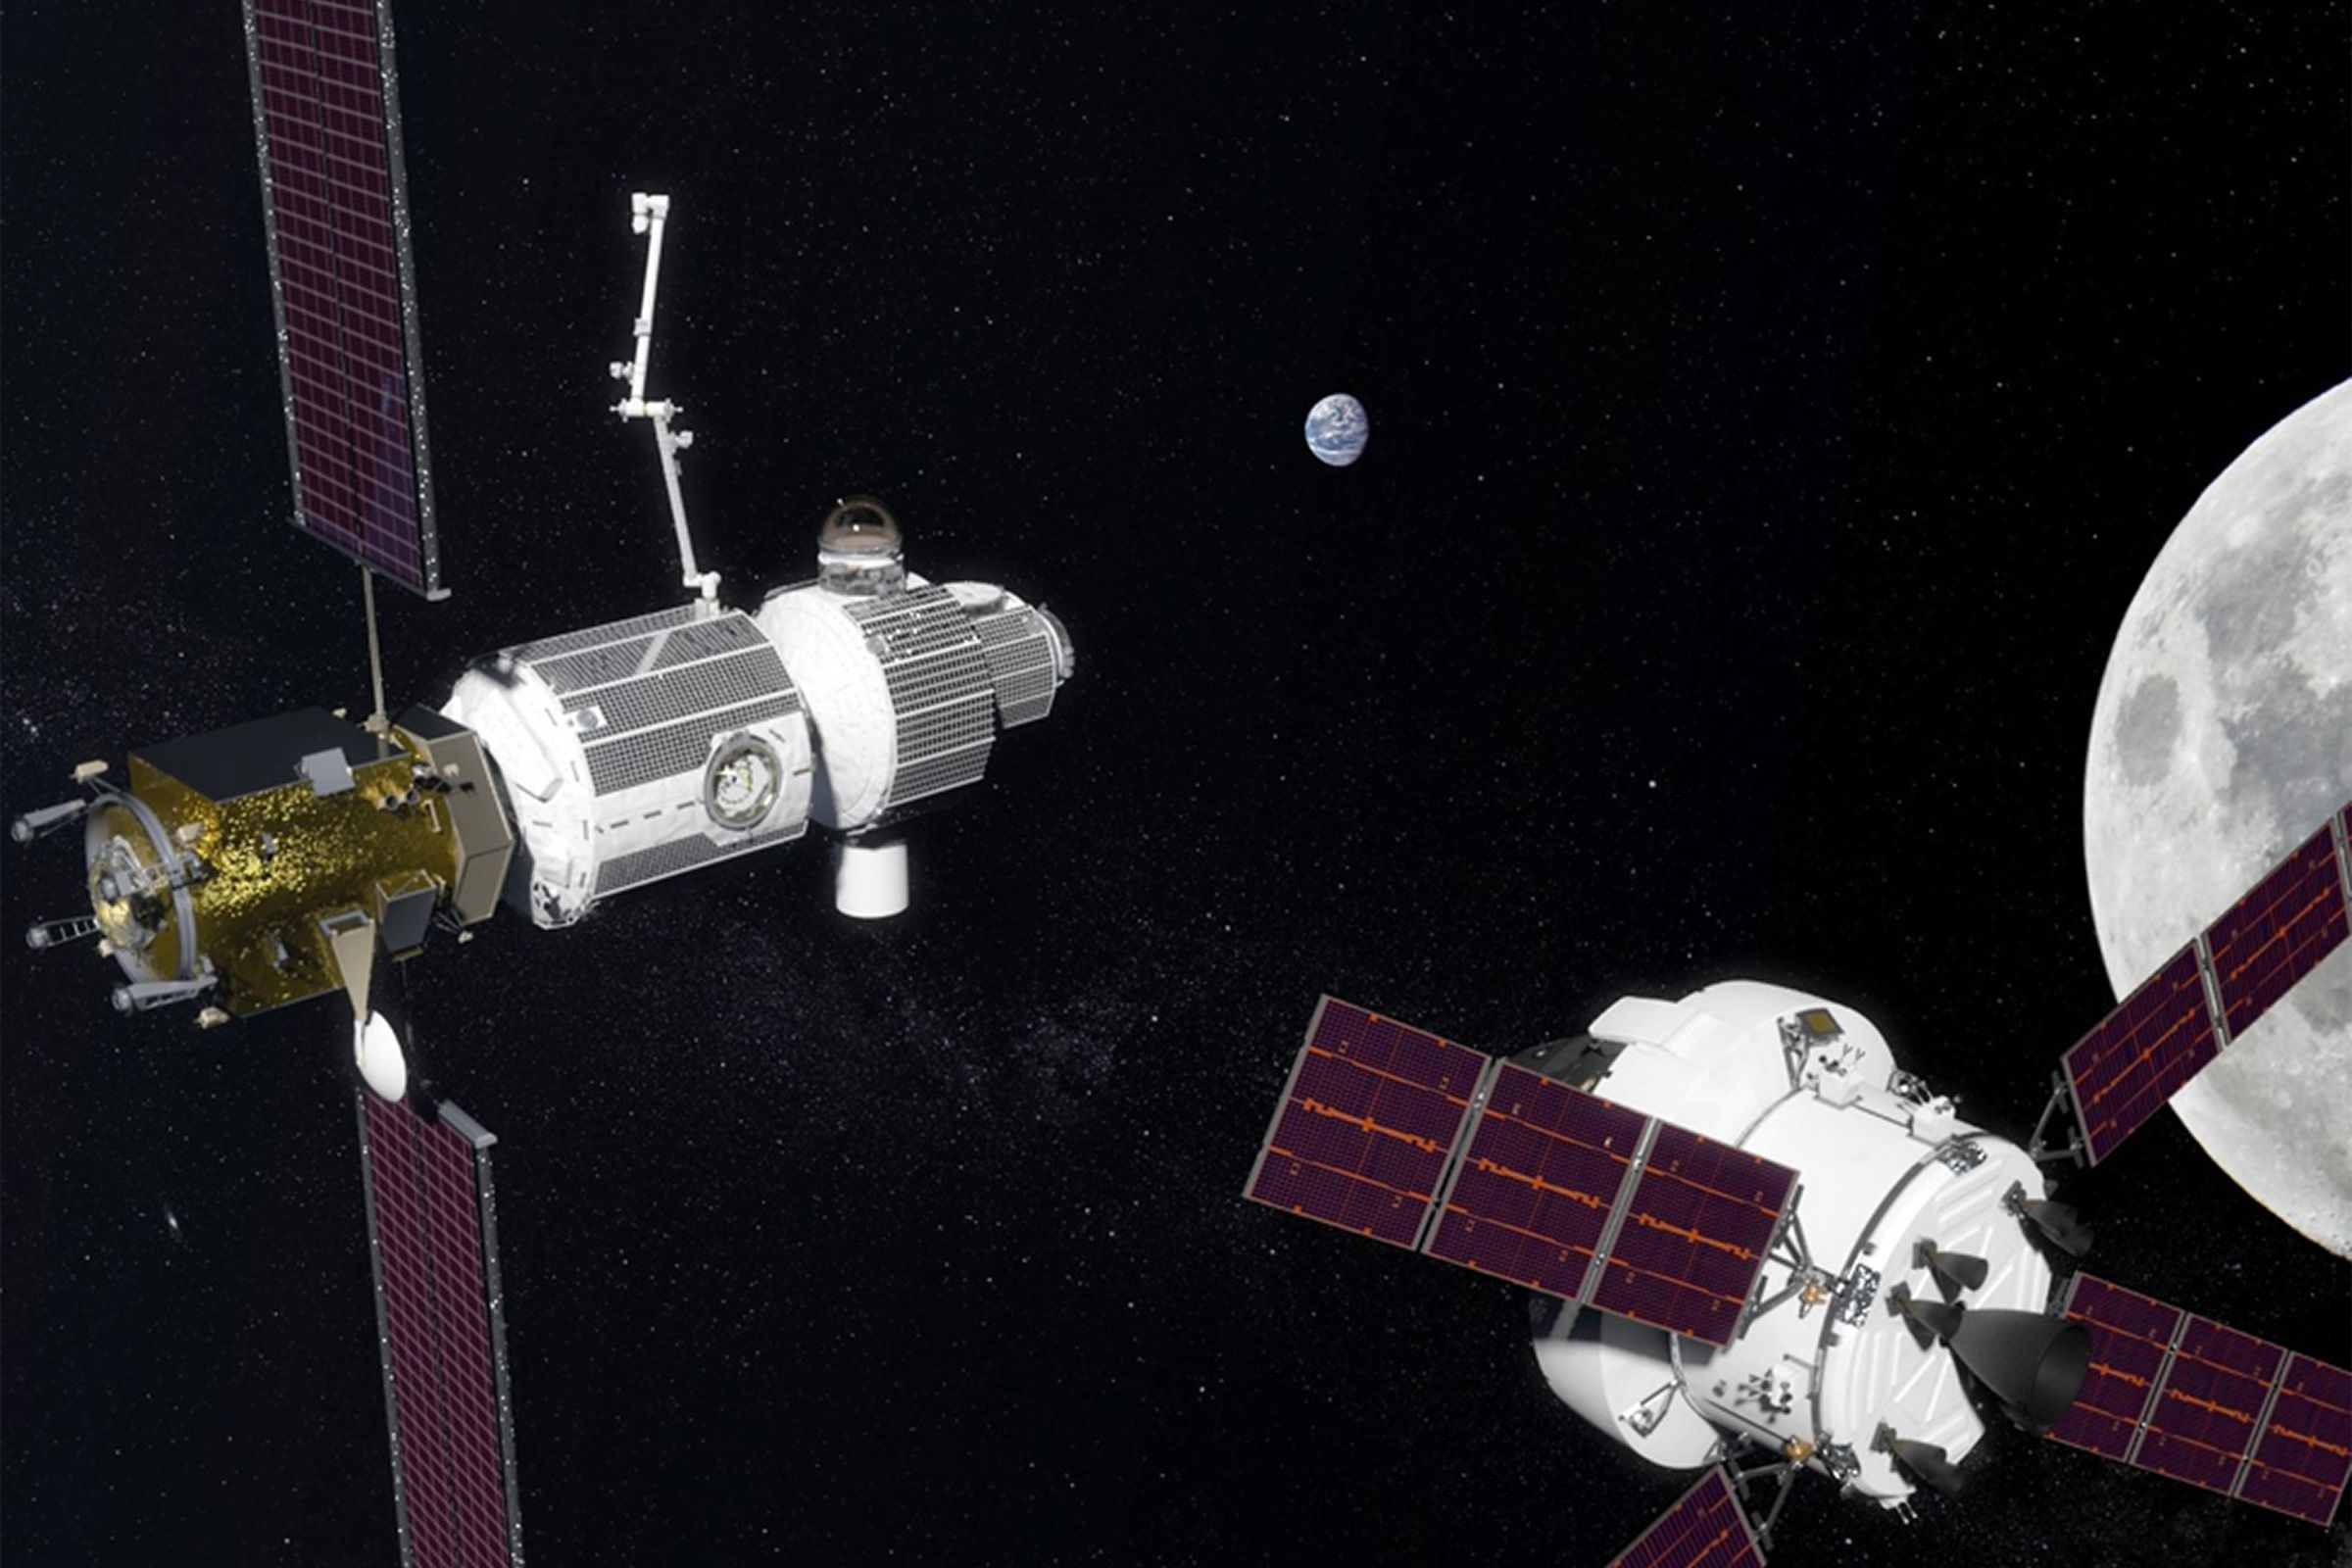 An artistic rendering of NASA’s planned lunar station Gateway.